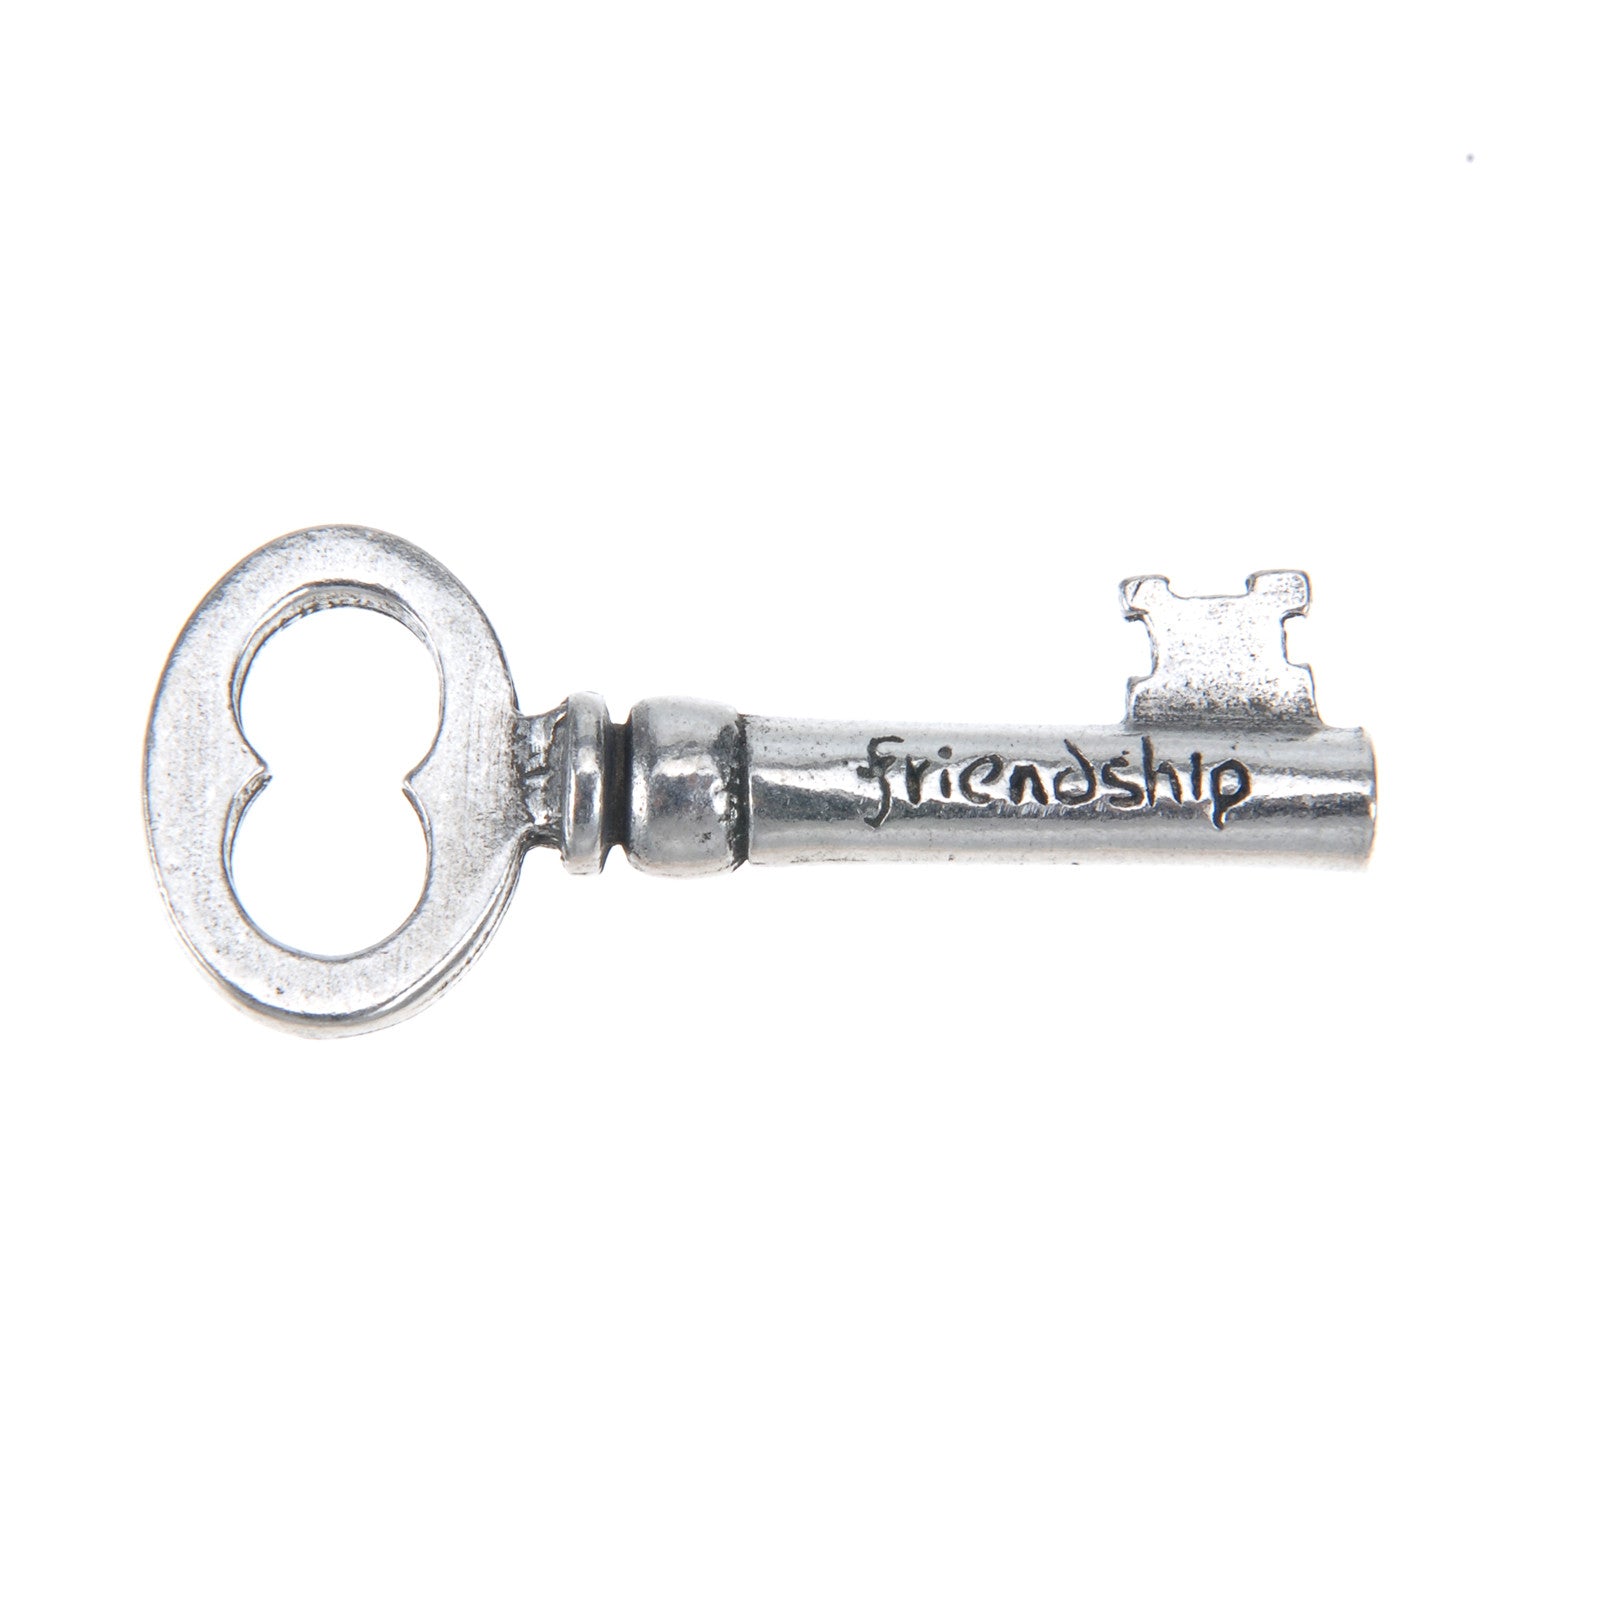 Friendship Key Charm | Inspiring Key Charms for Necklaces & Bracelets Loose Handcrafted in Pewter